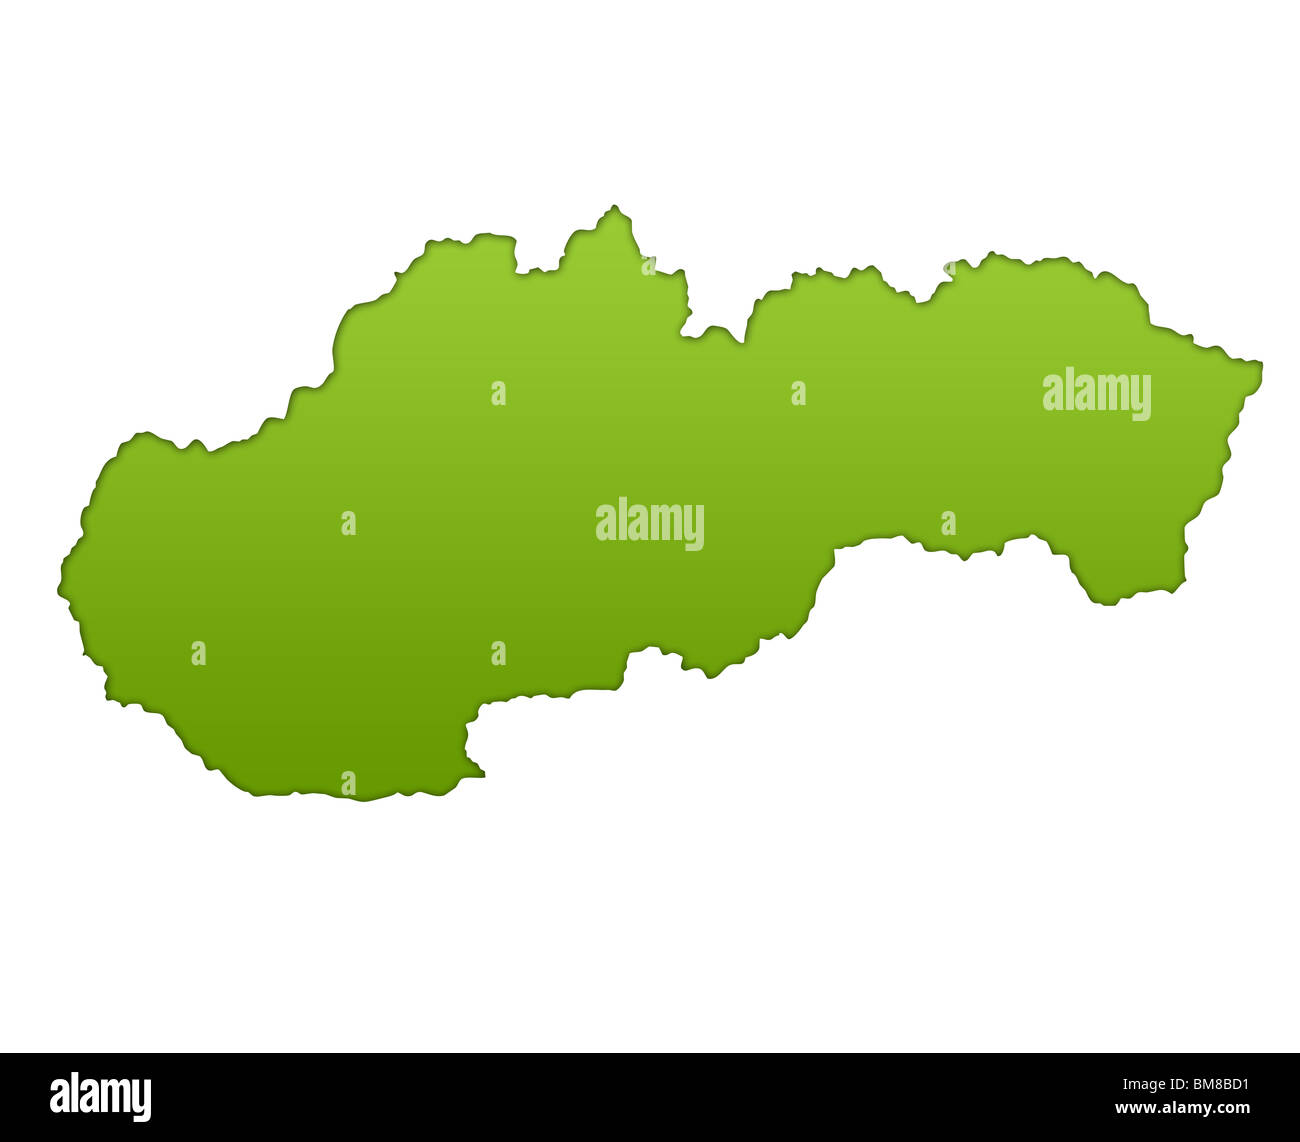 Slovakia map in gradient green, isolated on white background. Stock Photo